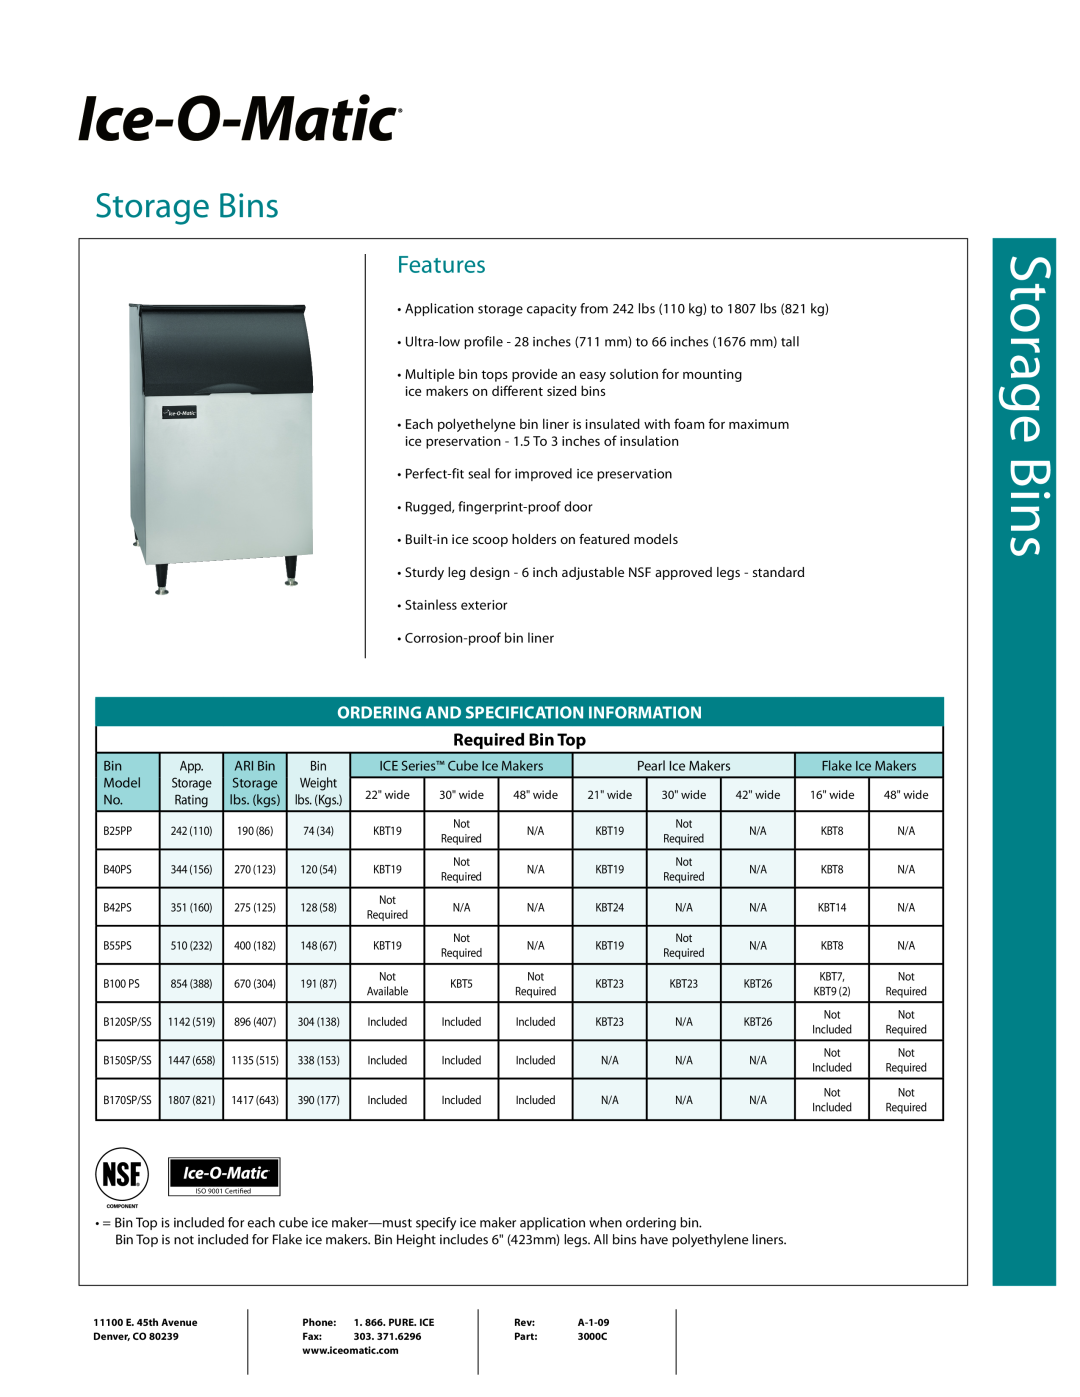 Ice-O-Matic manual Required Bin Top, Storage Bins, Features, Ordering And Specification Information 